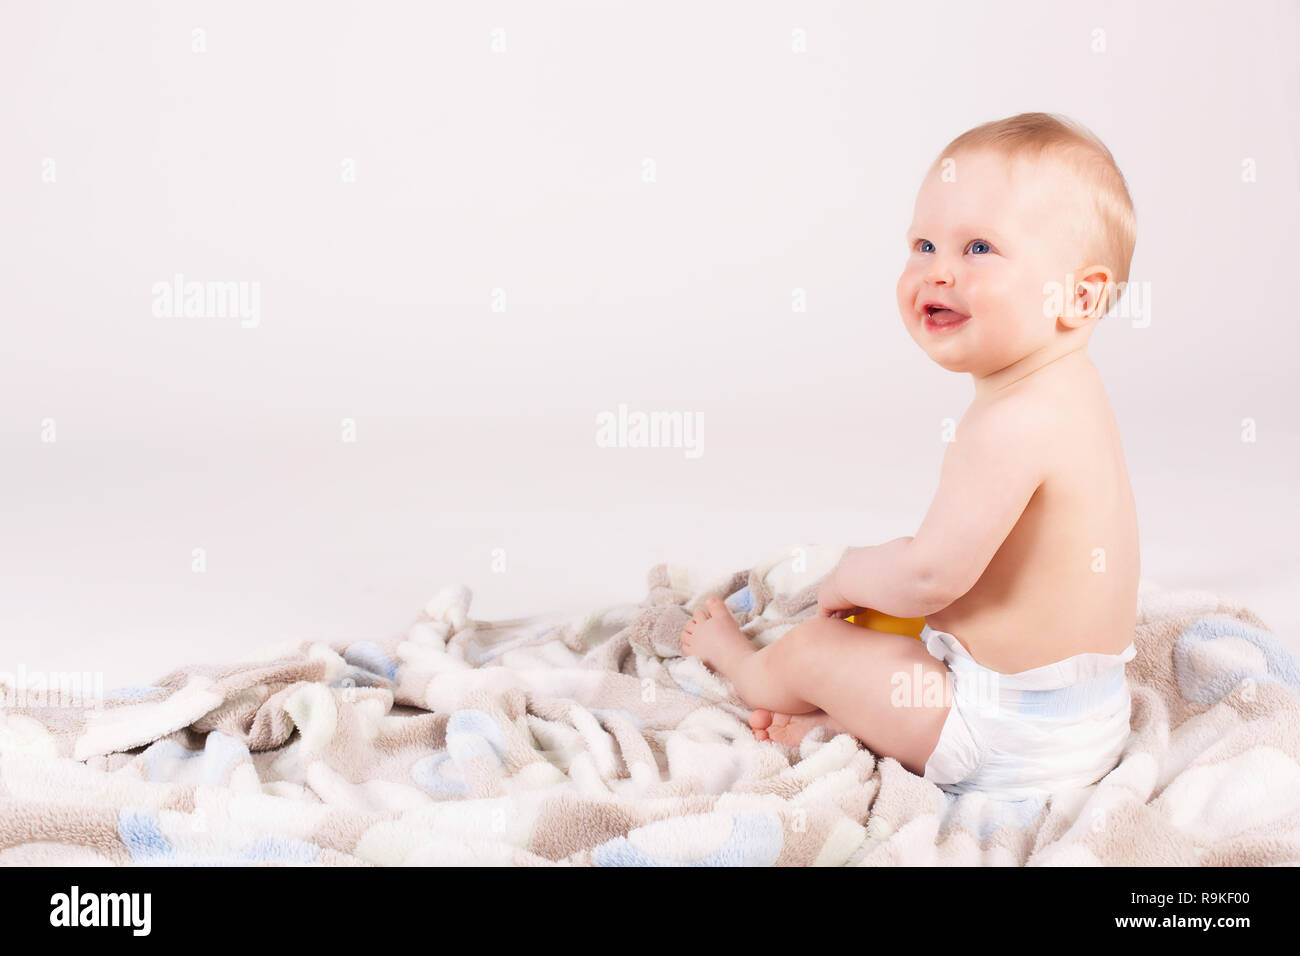 Adorable happy little boy smiling and sitting on a blanket, studio shoot. Stock Photo